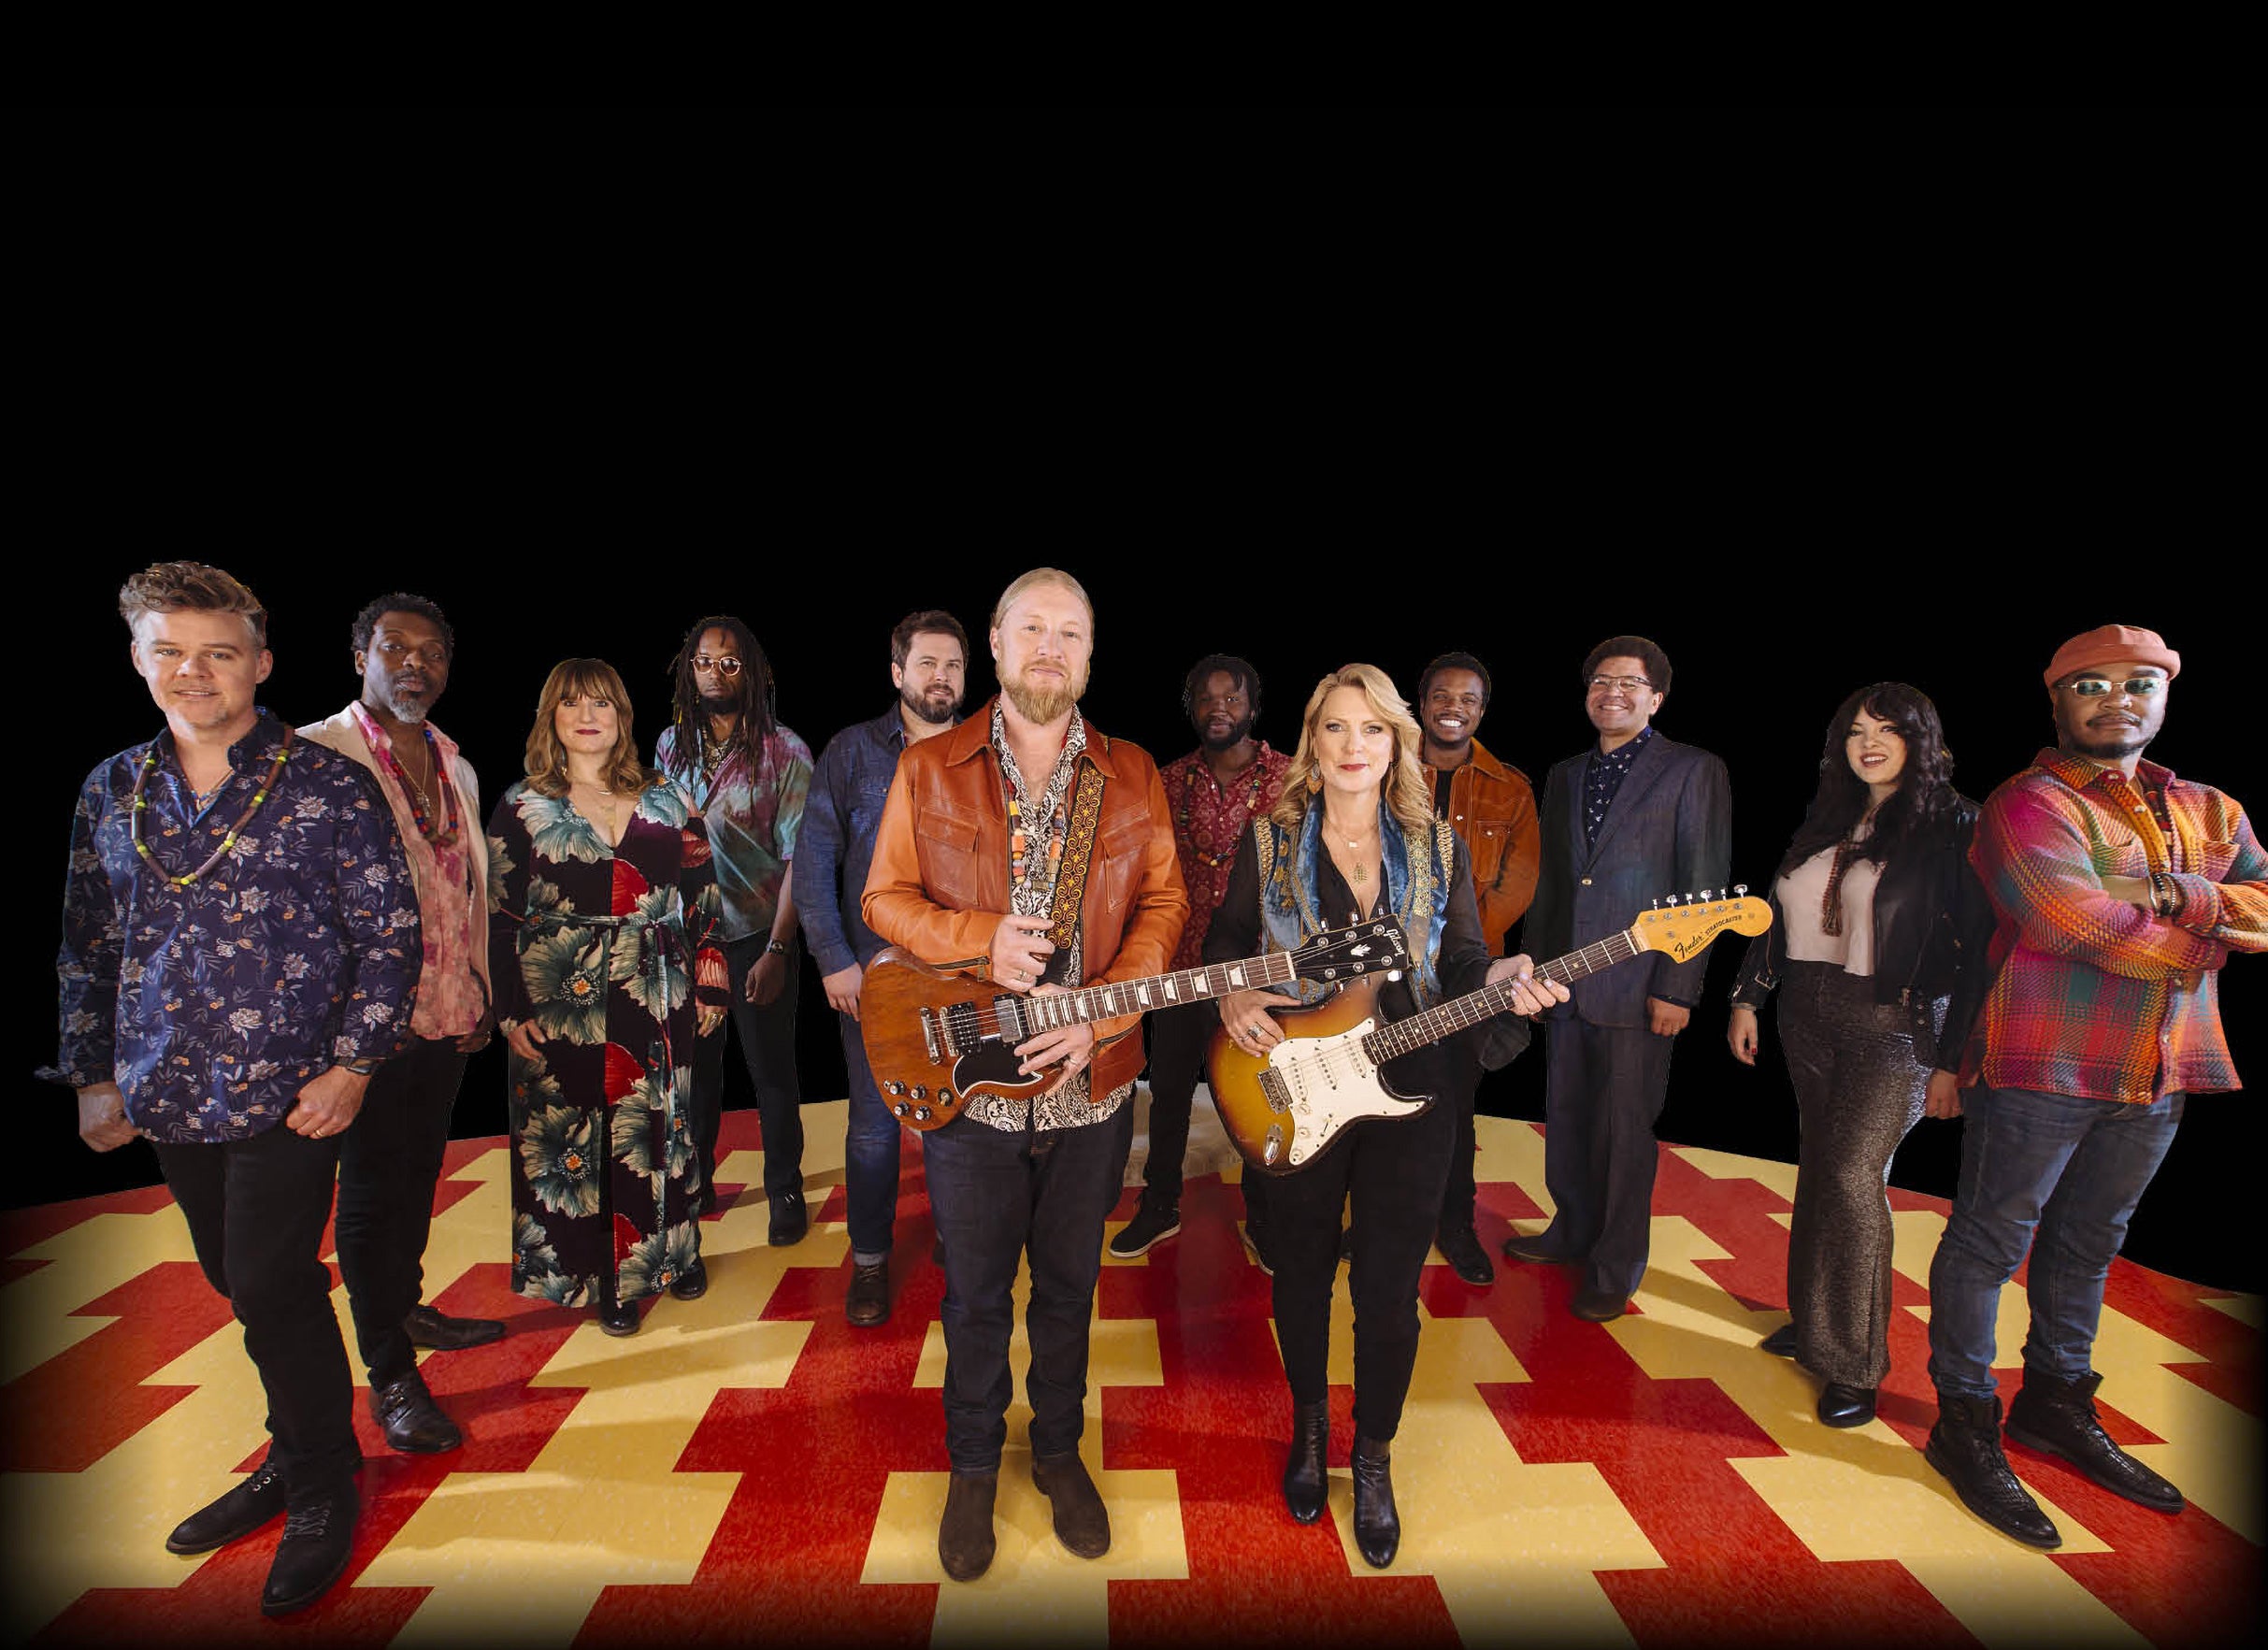 Tedeschi Trucks Band at The Chicago Theatre